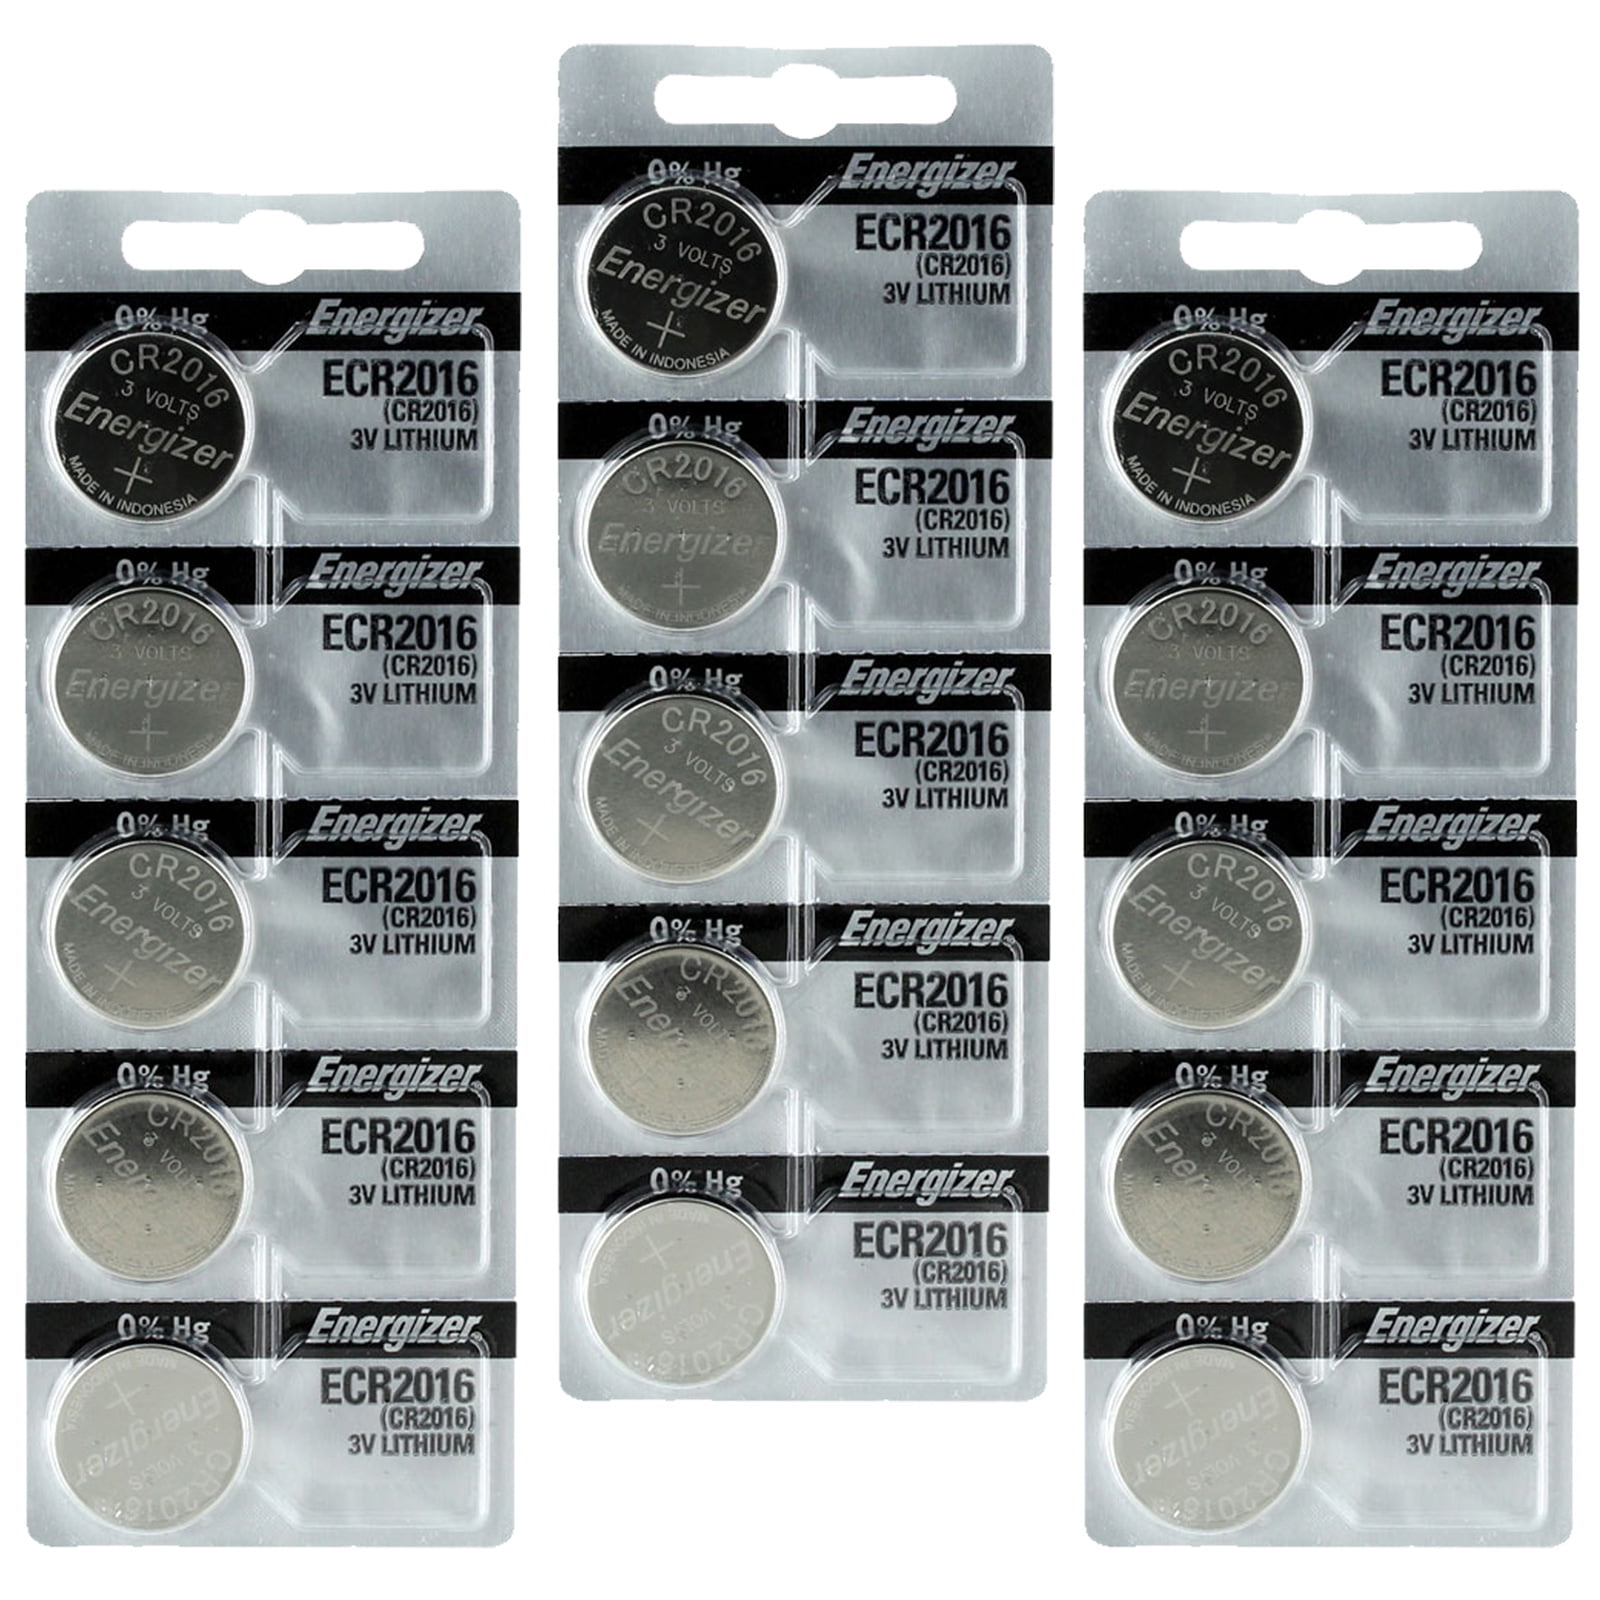 5x Energizer Lithium Coin Batteries CR2016 3v For use in vehicle remotes Electrical Products 